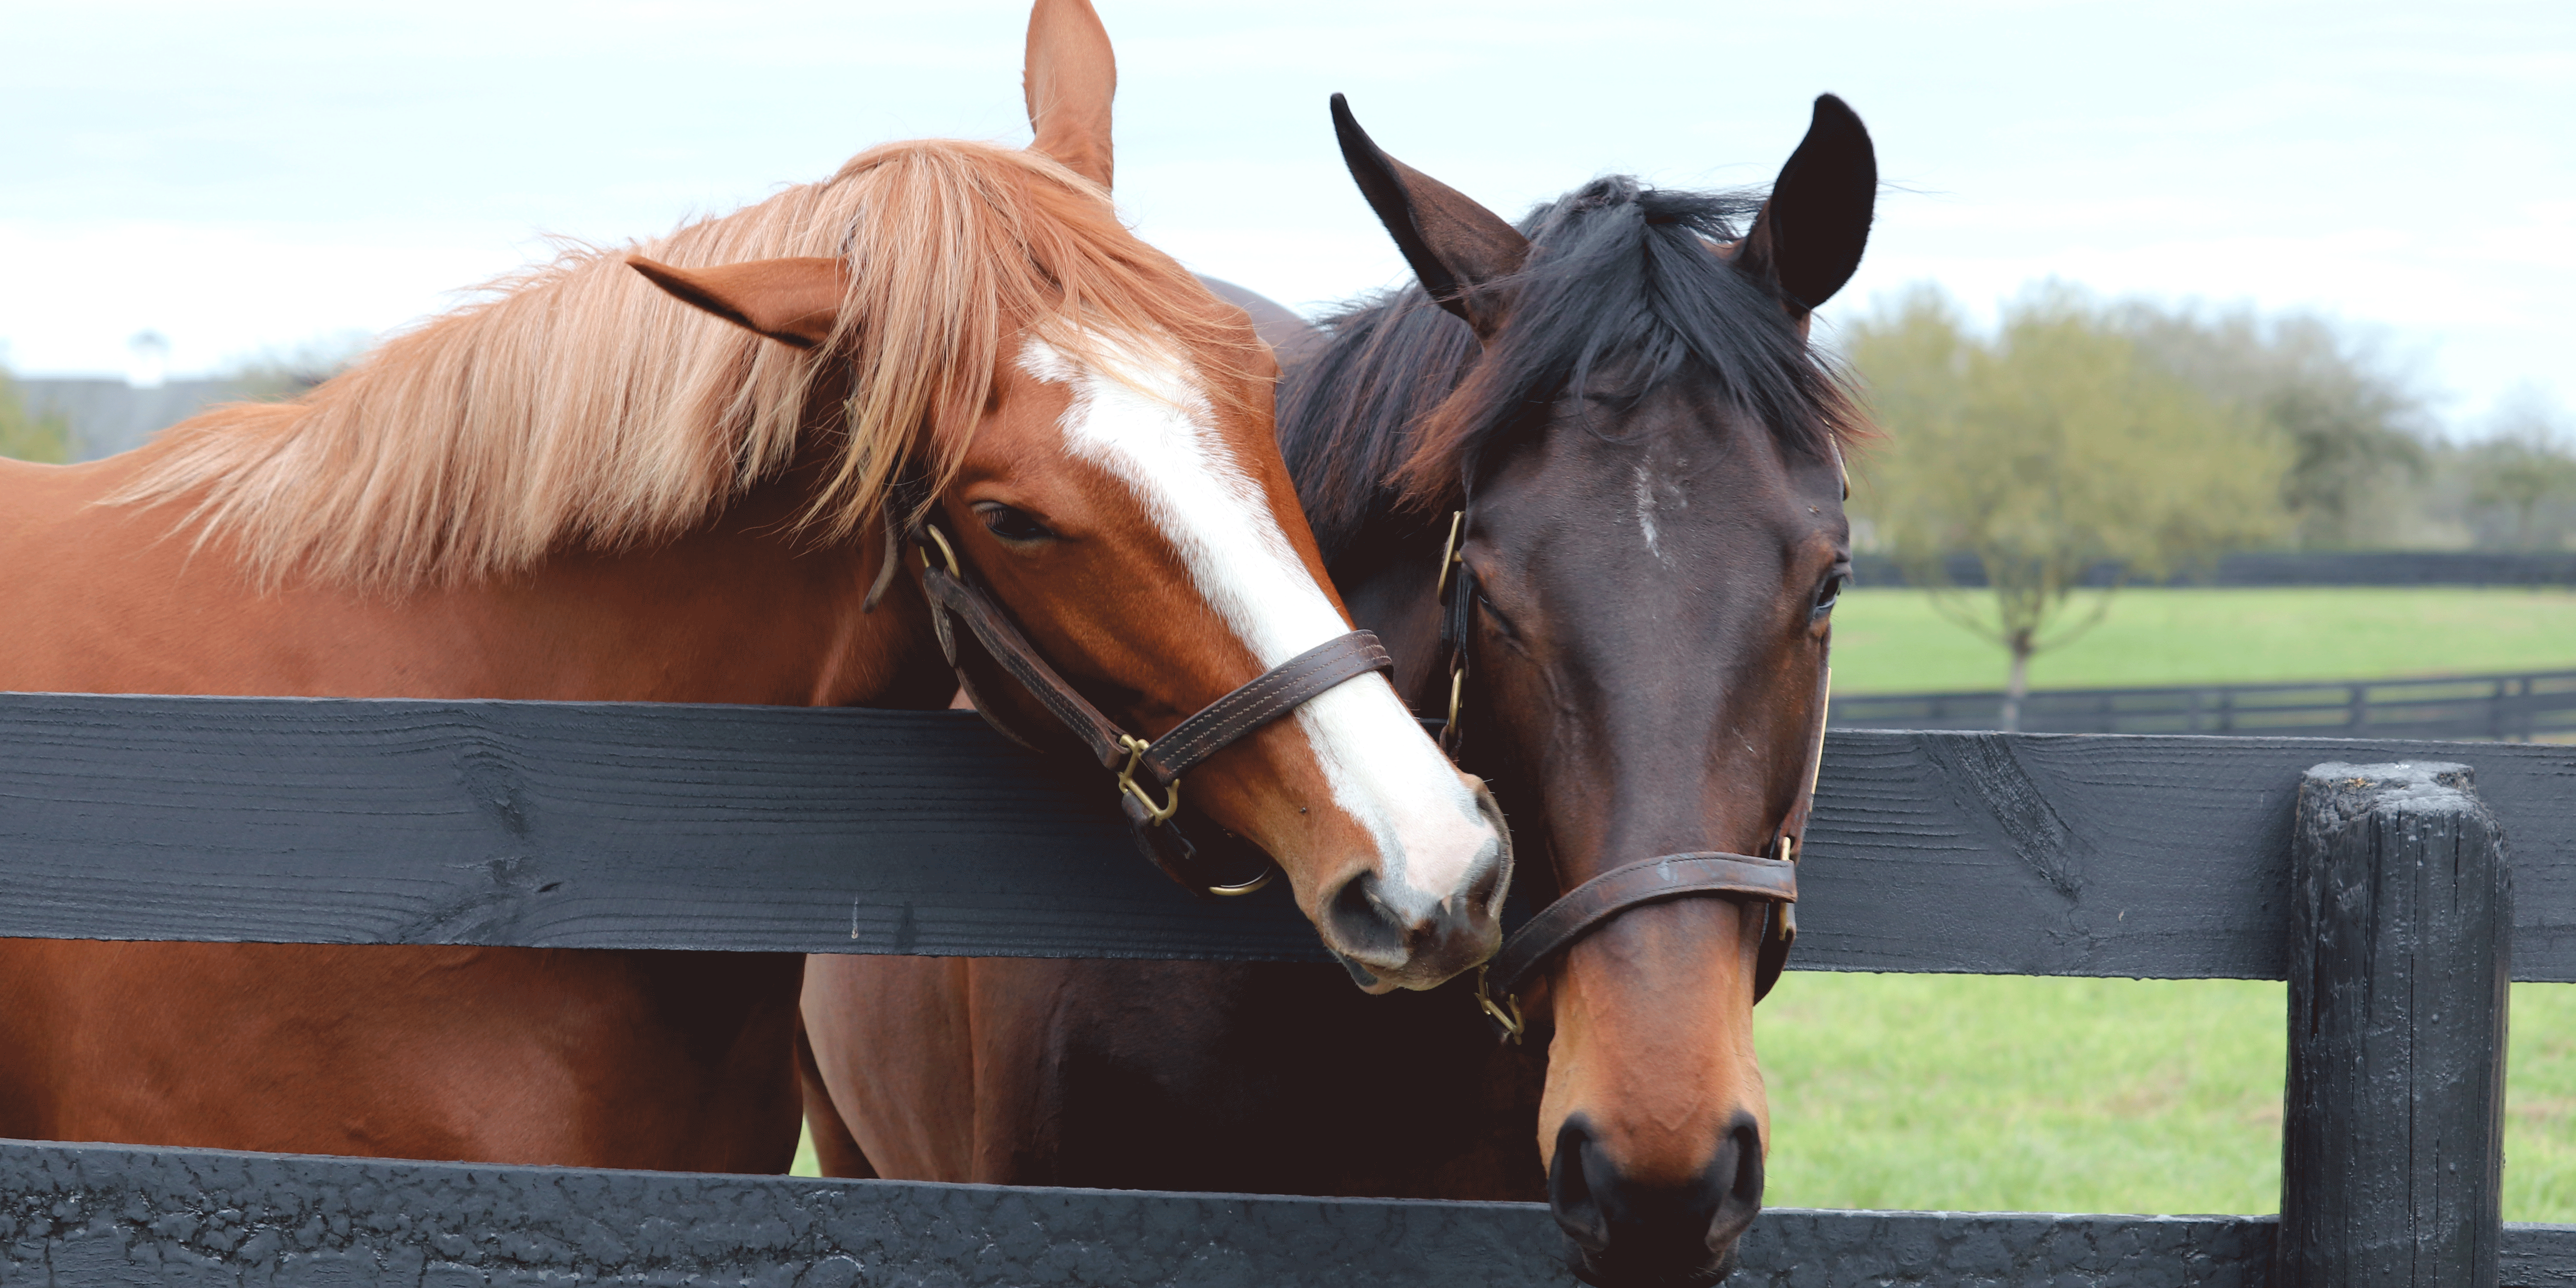 Horses nuzzling each other over a fence.